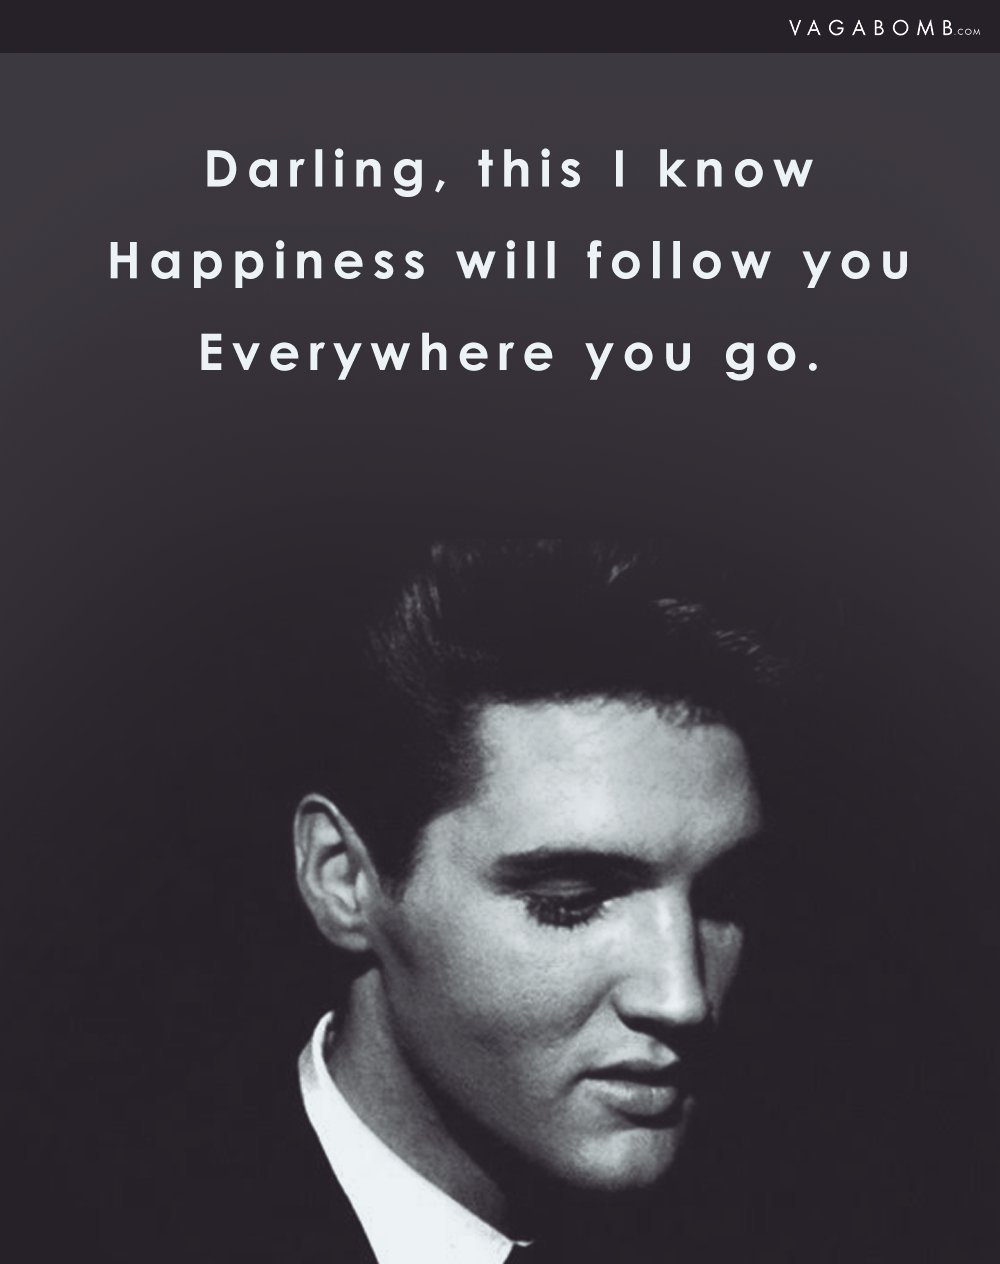 5 Elvis Presley Quotes About Love